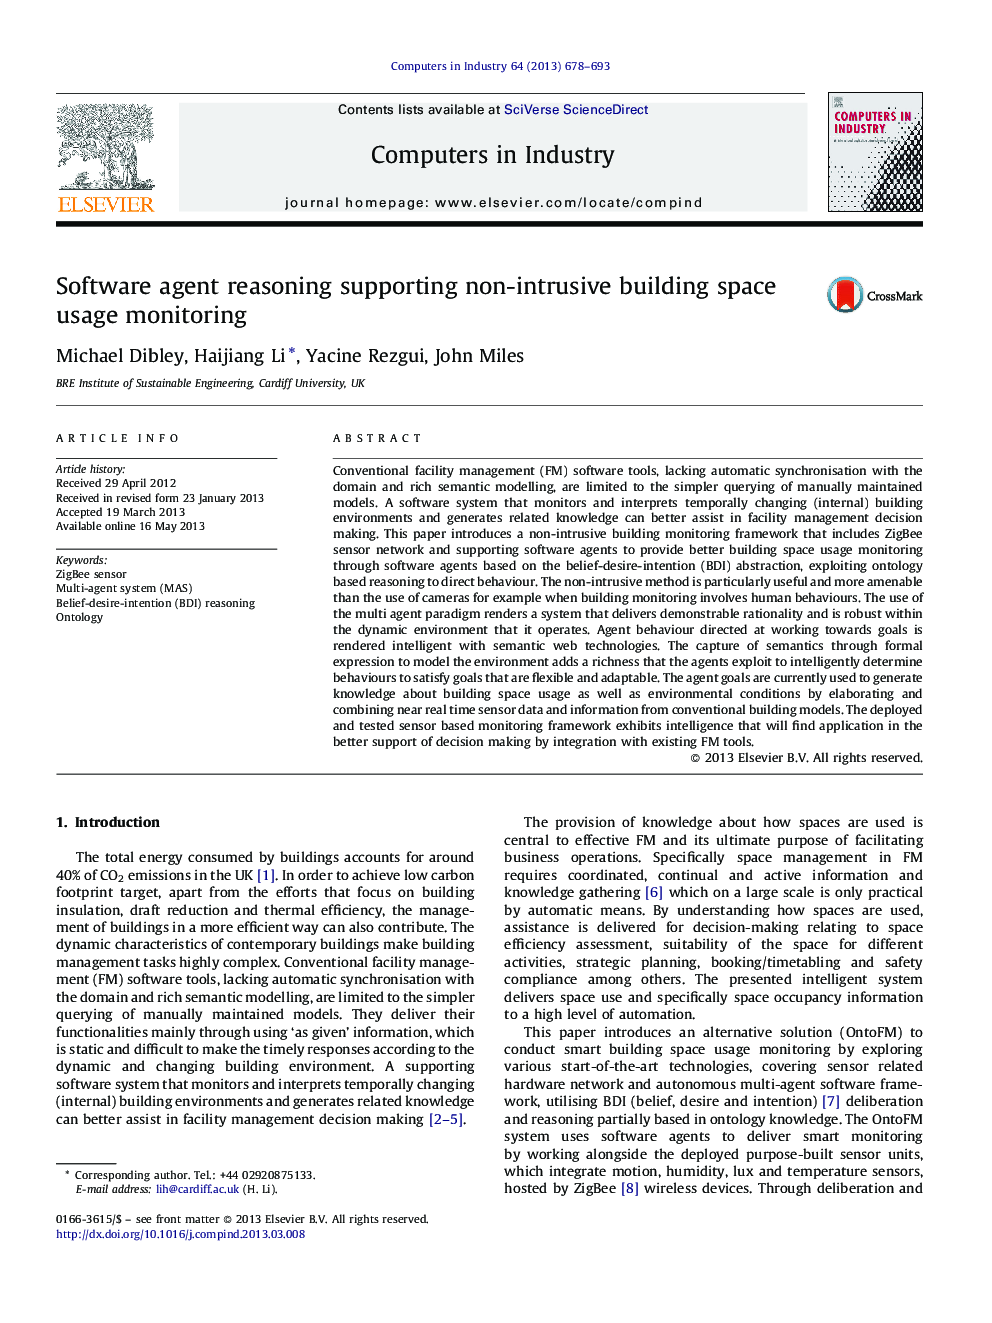 Software agent reasoning supporting non-intrusive building space usage monitoring